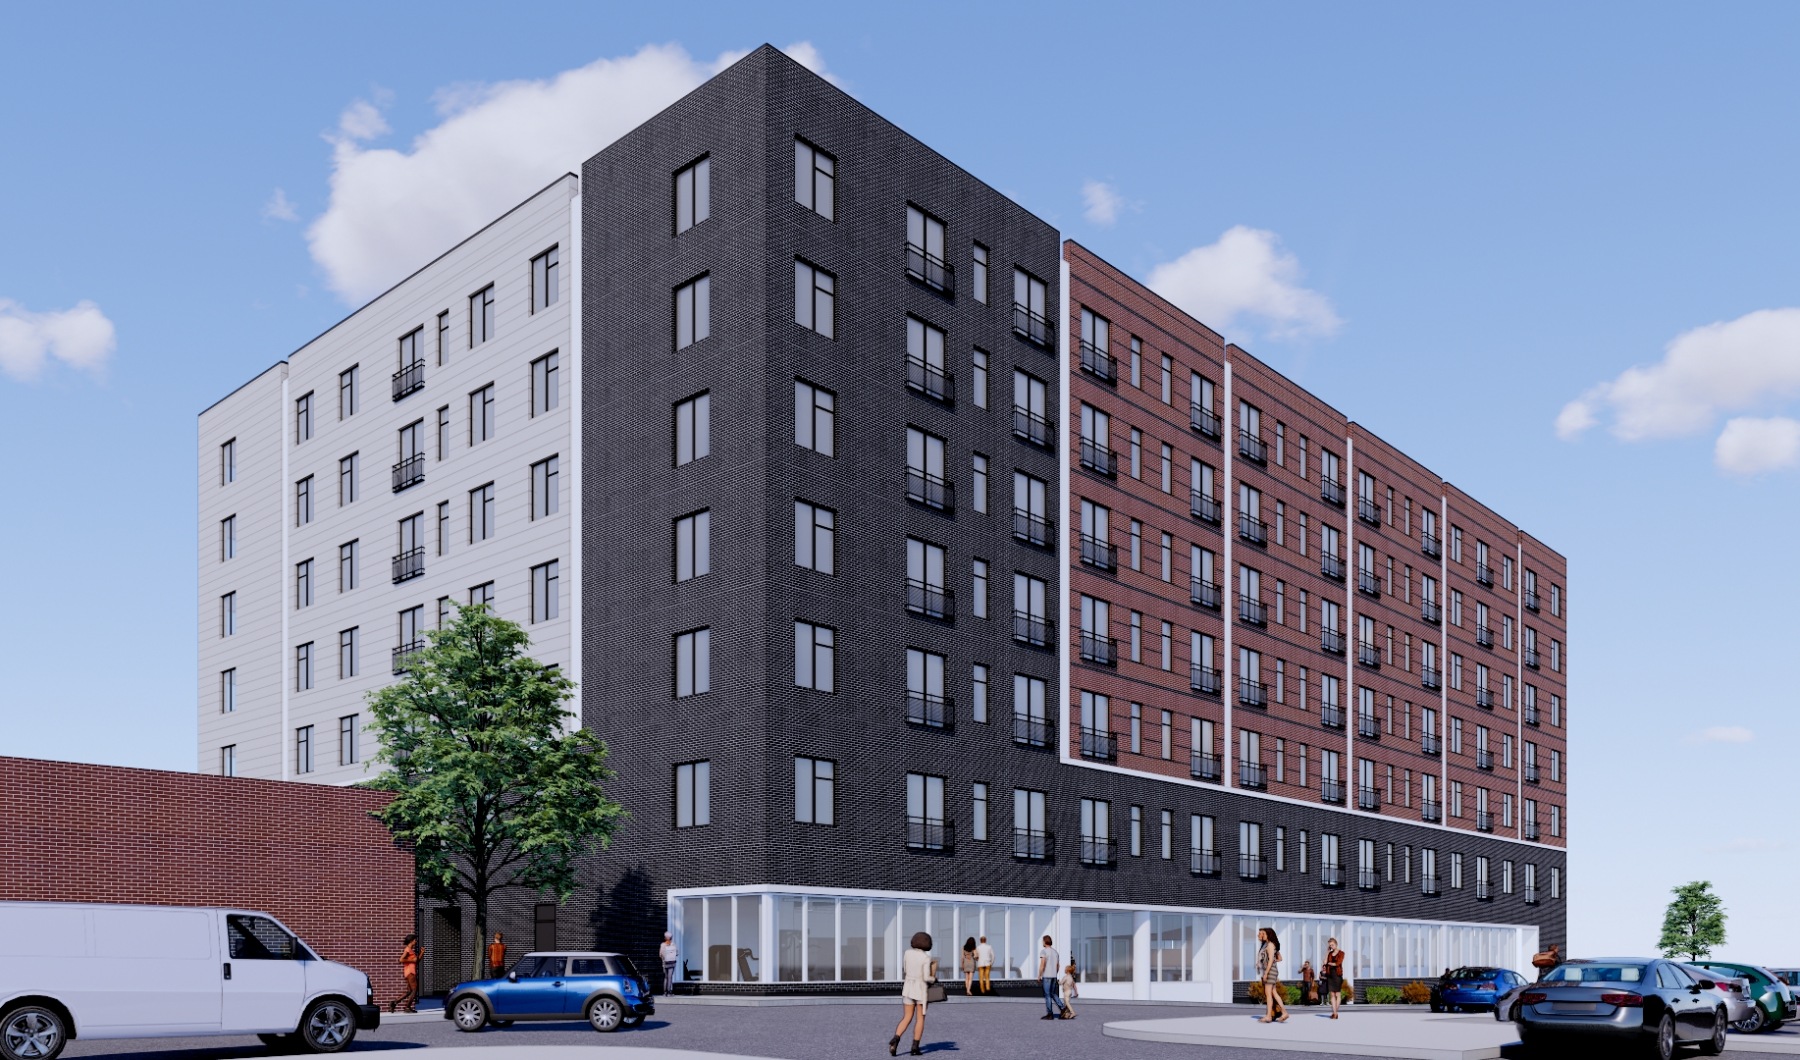 NOW LEASING IN DOWNTOWN NASHUA